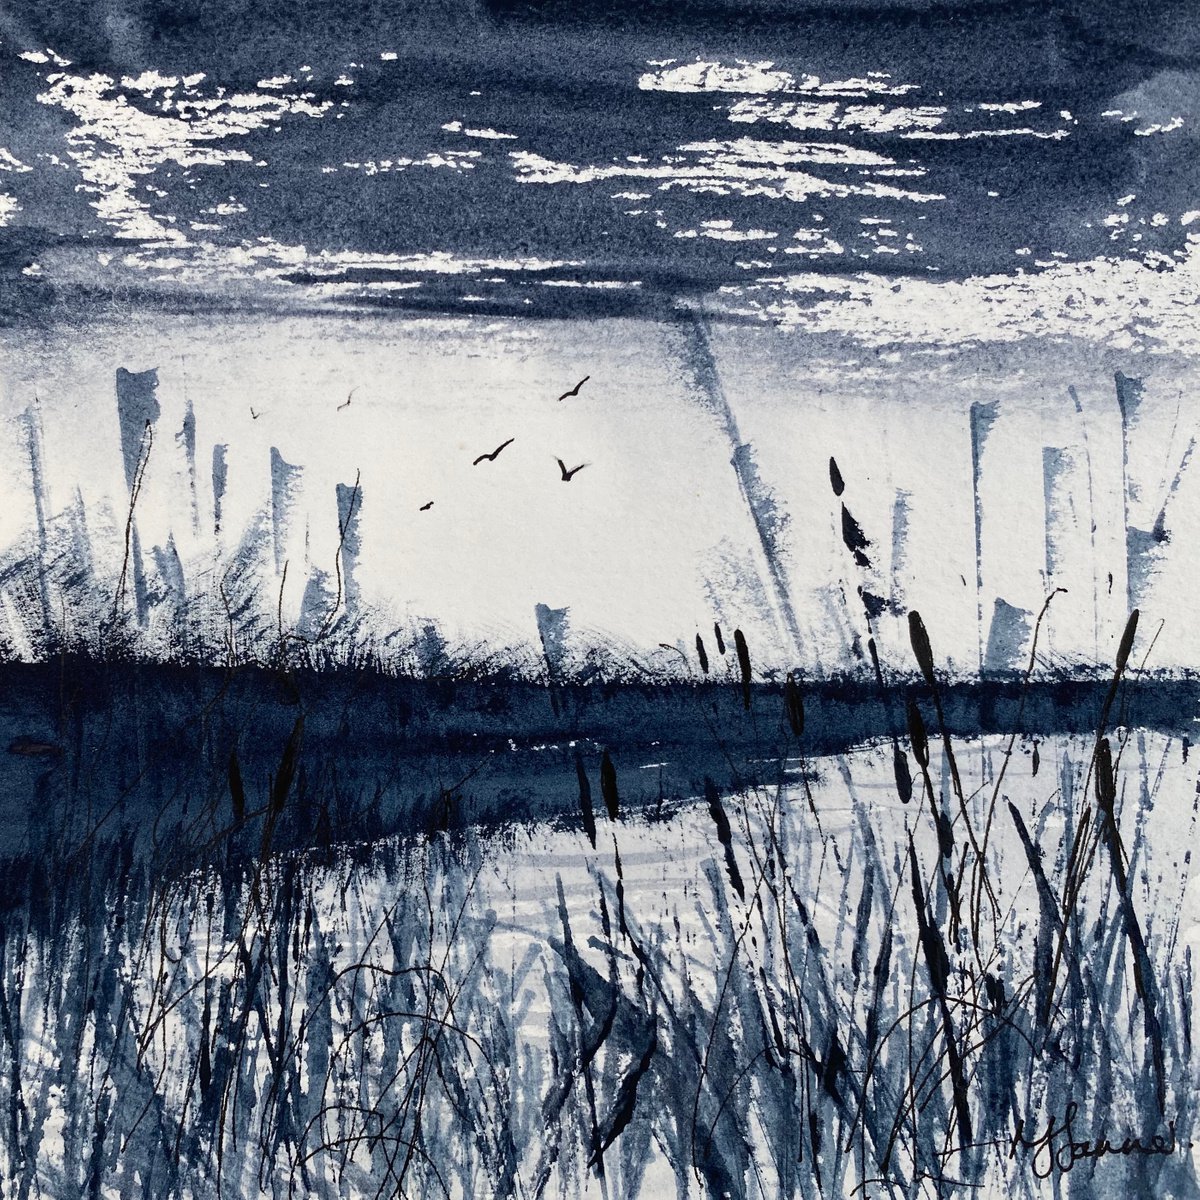 Monochrome Reeds & Rushes by Teresa Tanner